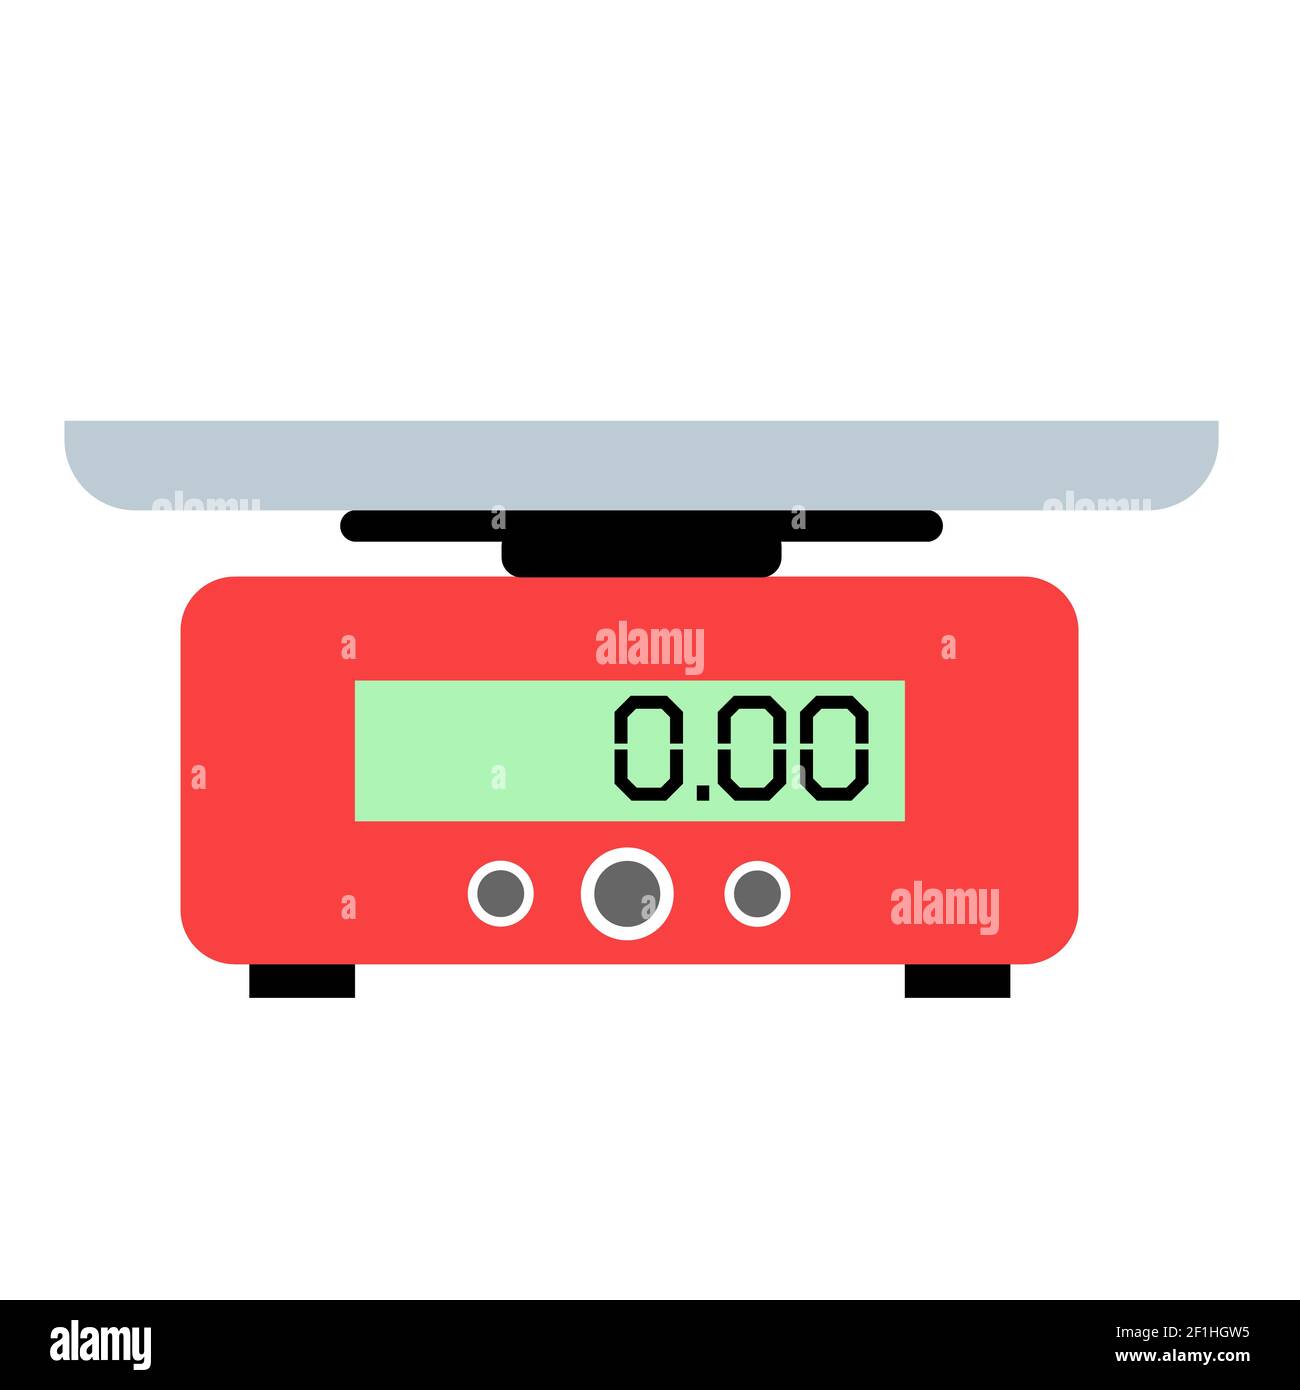 https://c8.alamy.com/comp/2F1HGW5/food-weight-kitchen-on-white-background-domestic-weigh-scale-food-balance-sign-food-scale-symbol-flat-style-digital-food-scale-2F1HGW5.jpg